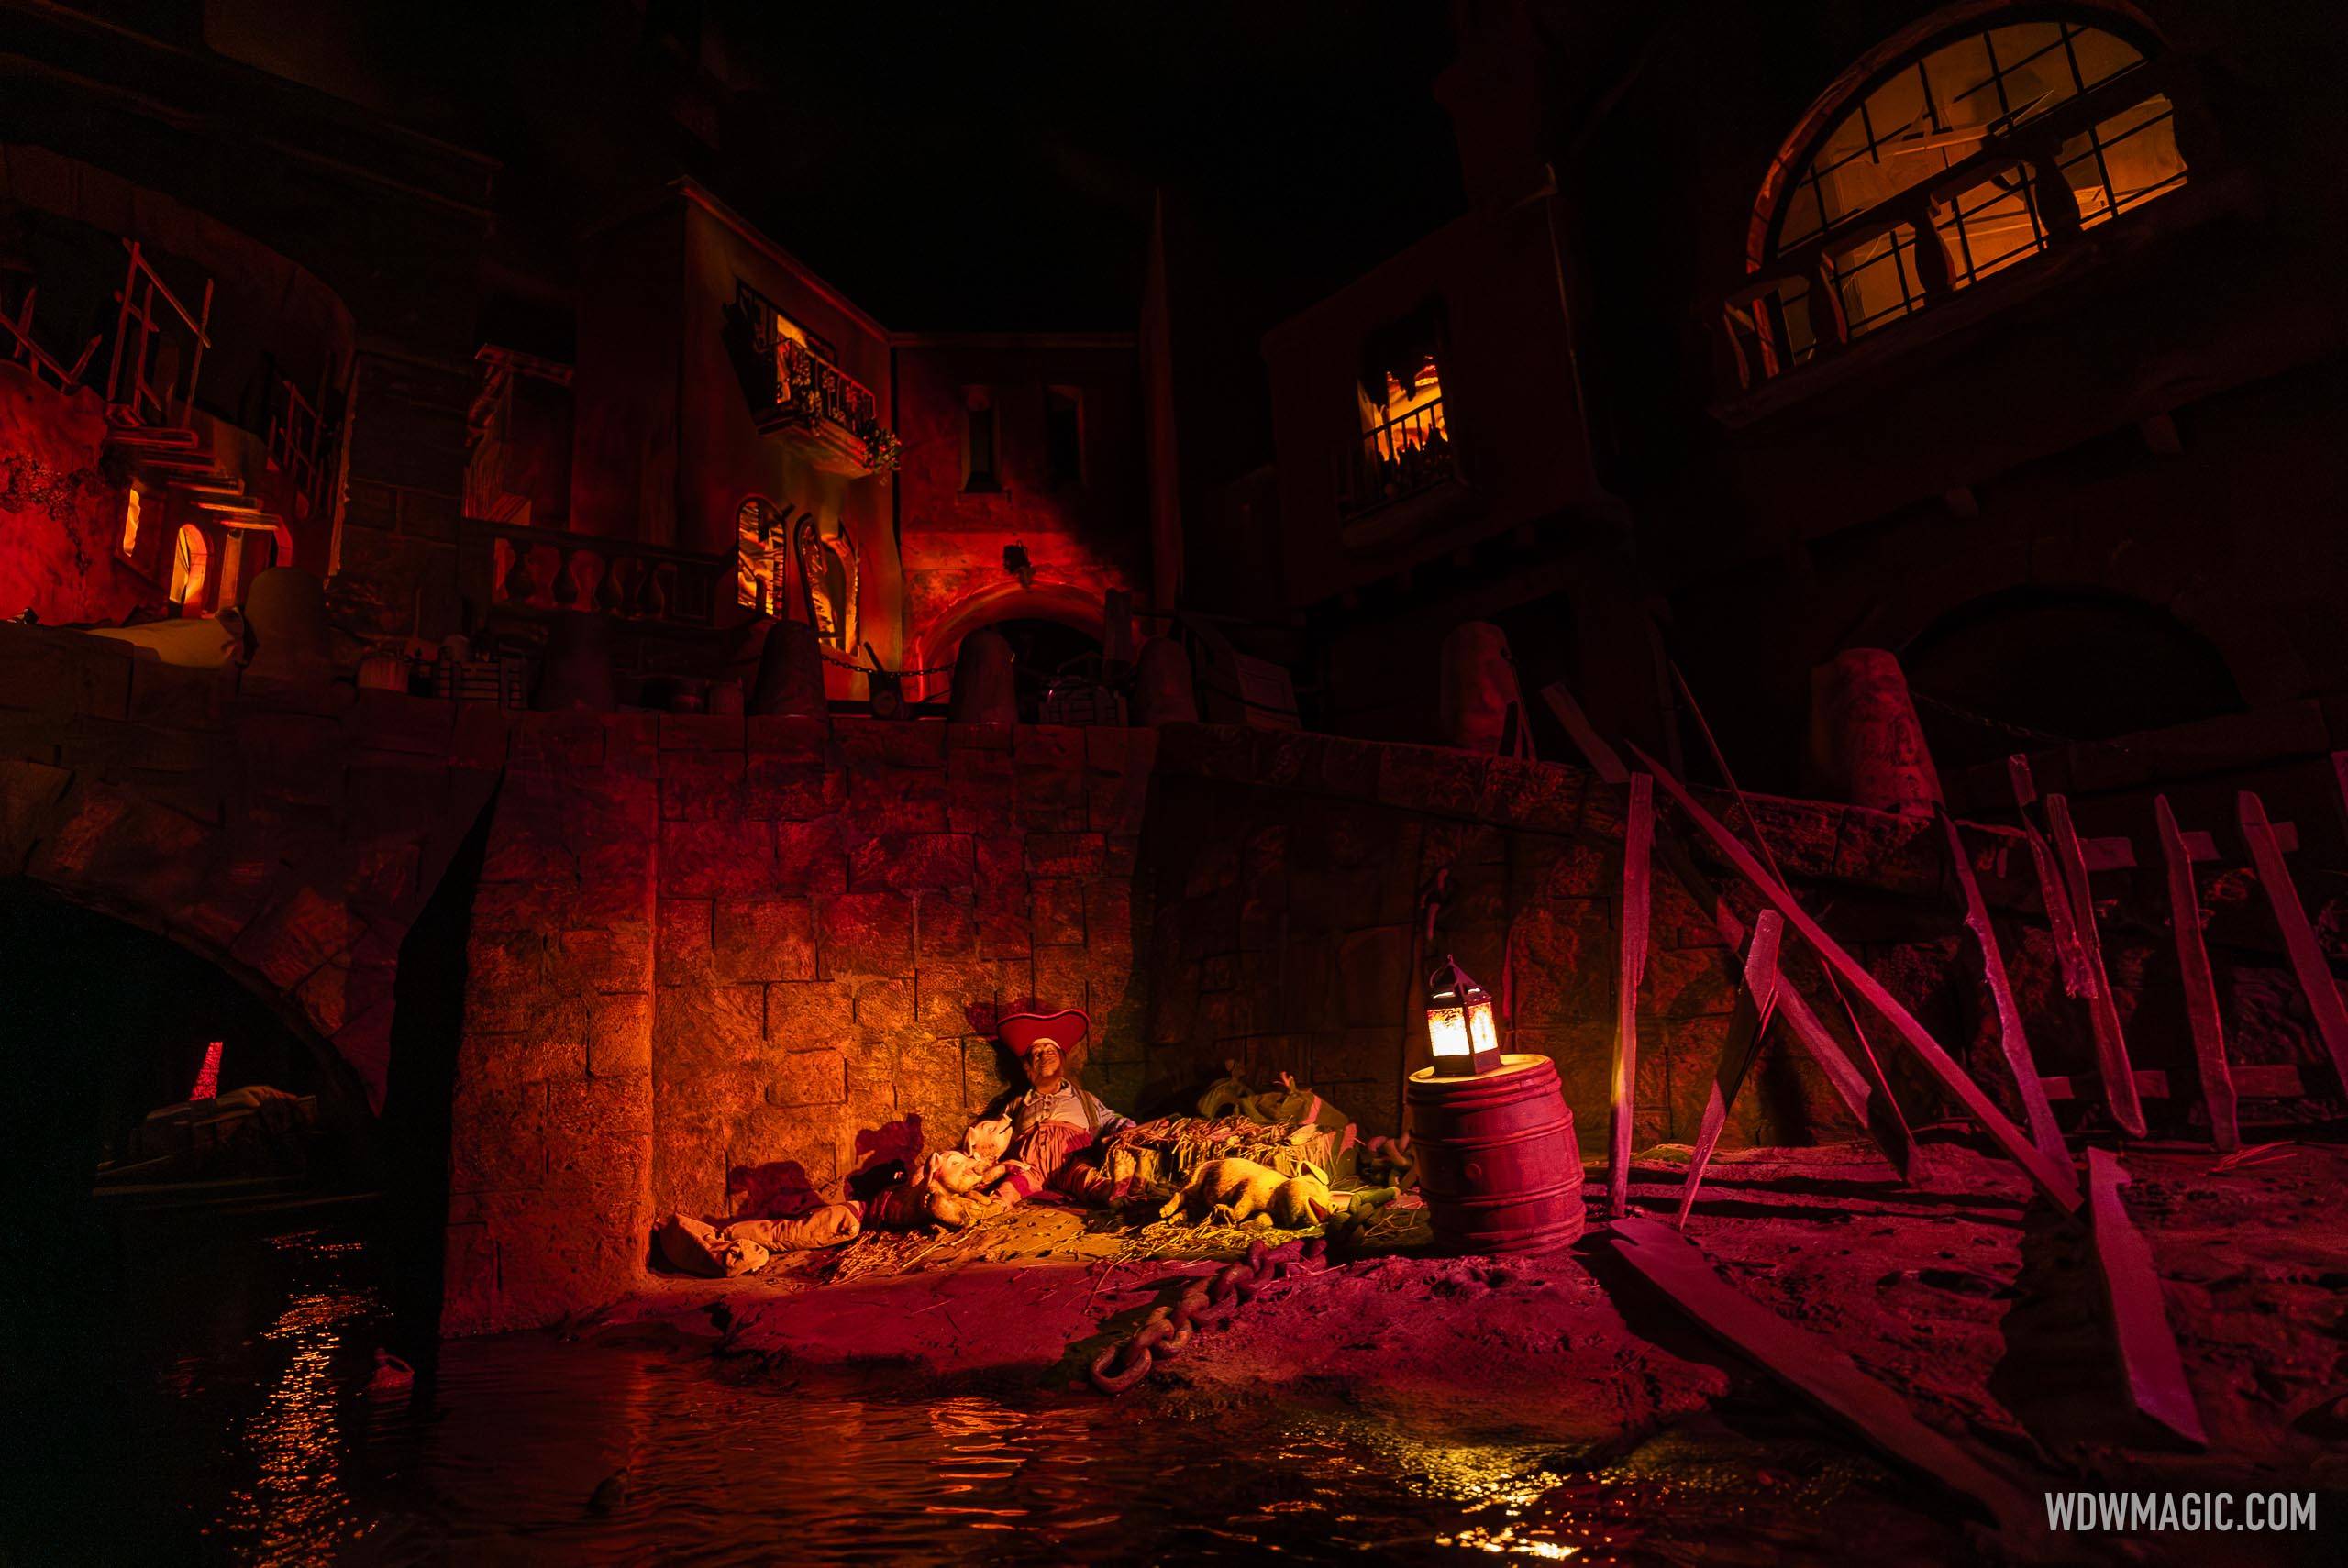 Pirates Easter reopening potentially delayed